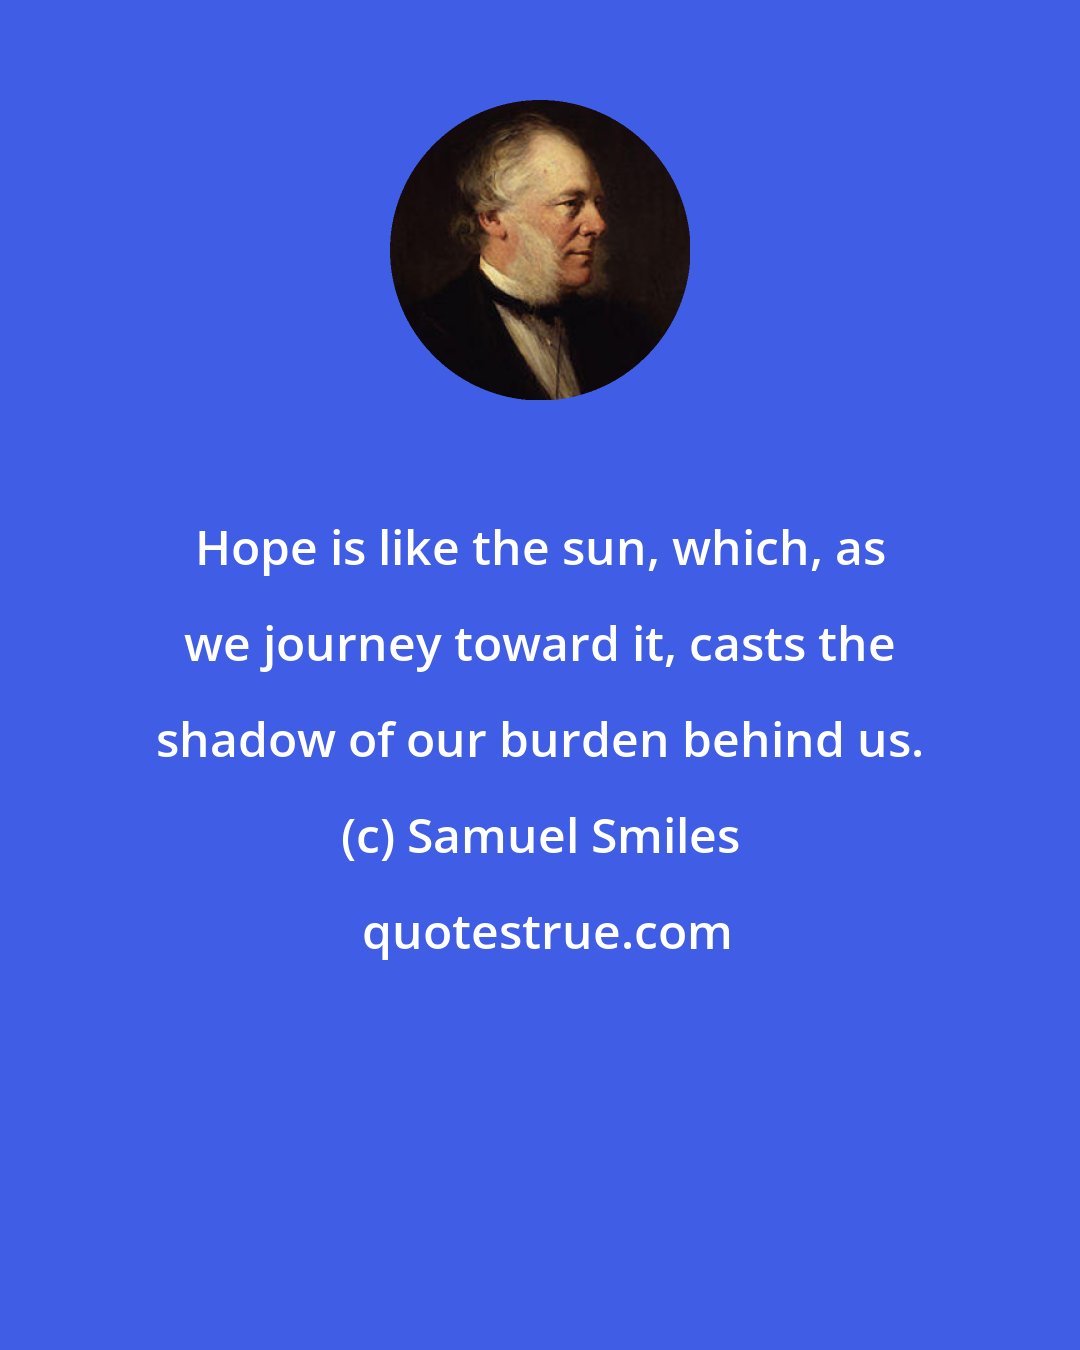 Samuel Smiles: Hope is like the sun, which, as we journey toward it, casts the shadow of our burden behind us.